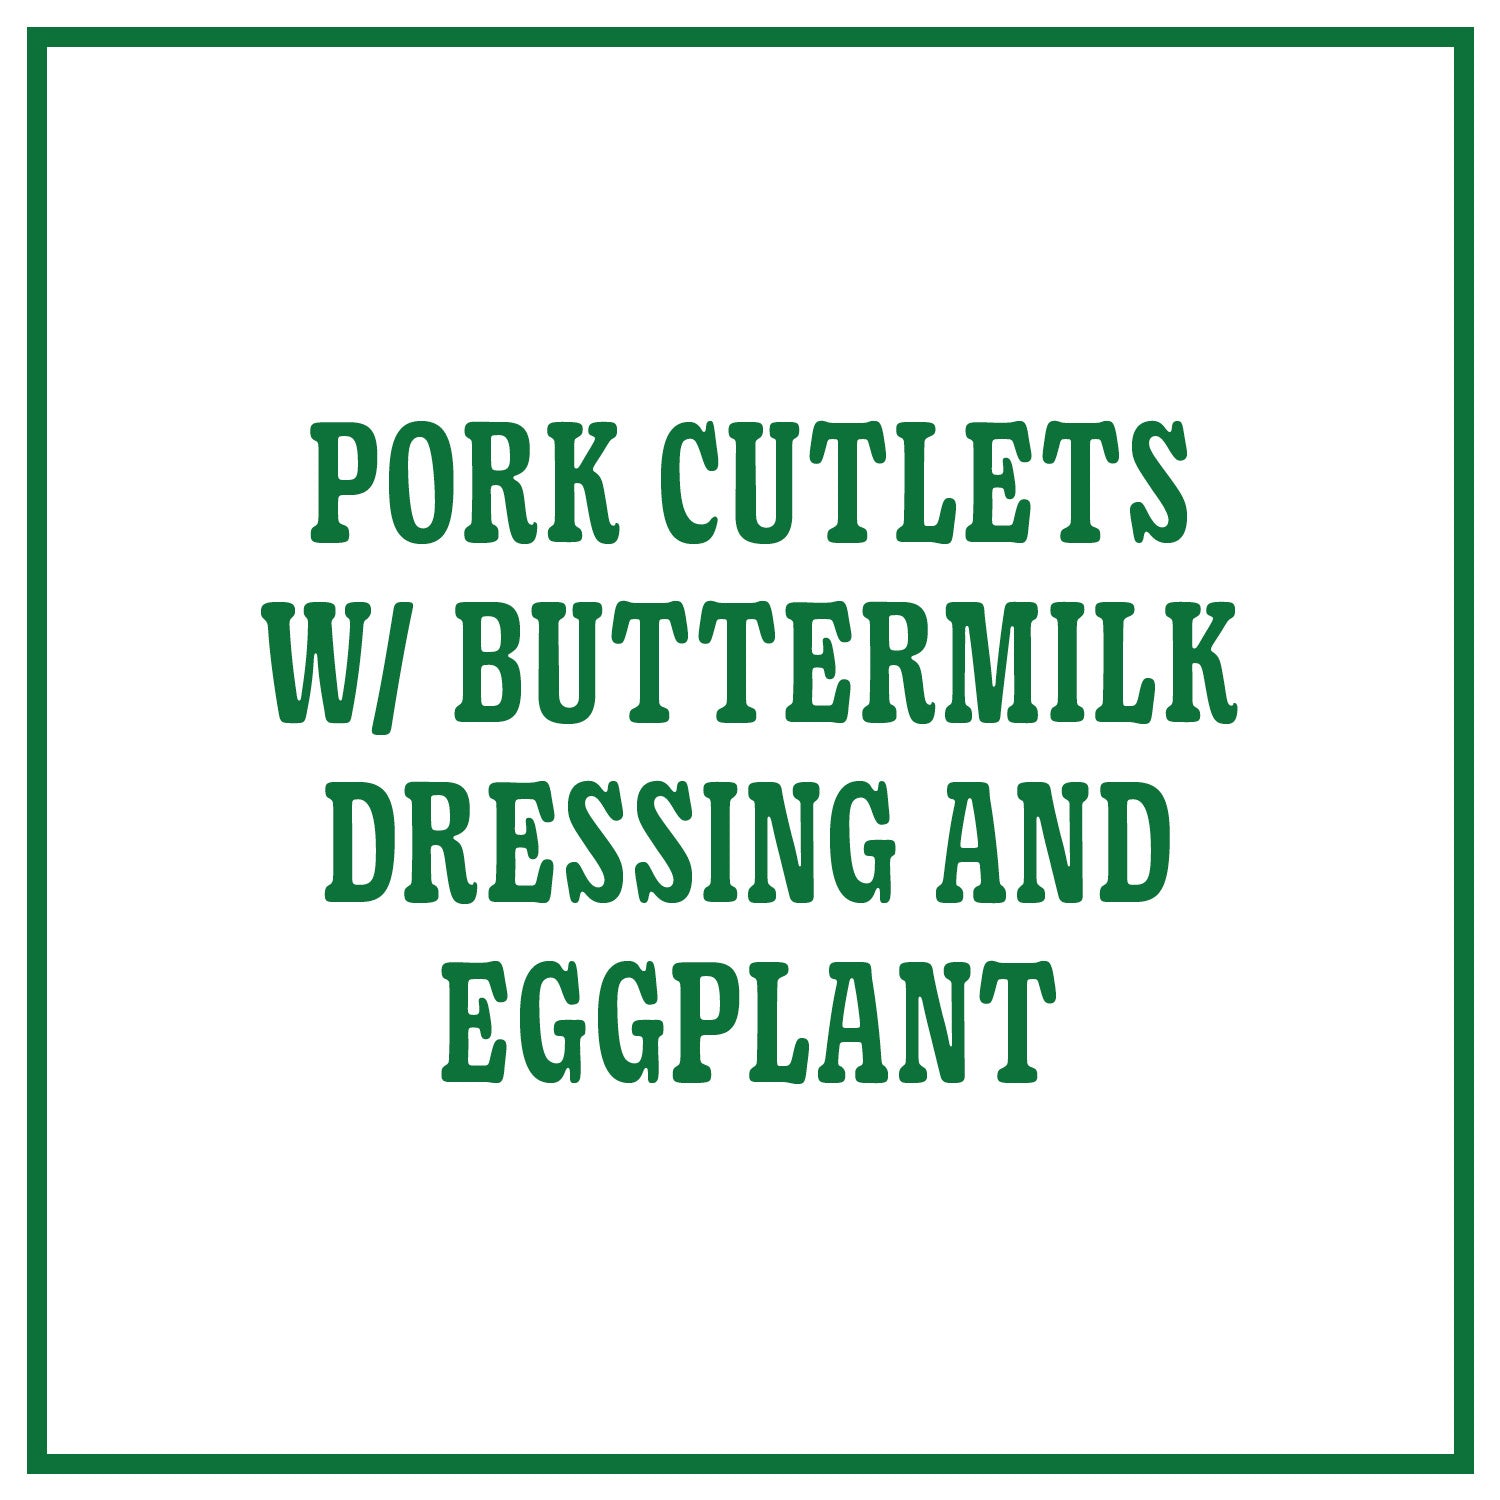 Pork Cutlets with Buttermilk Dressing and Eggplant